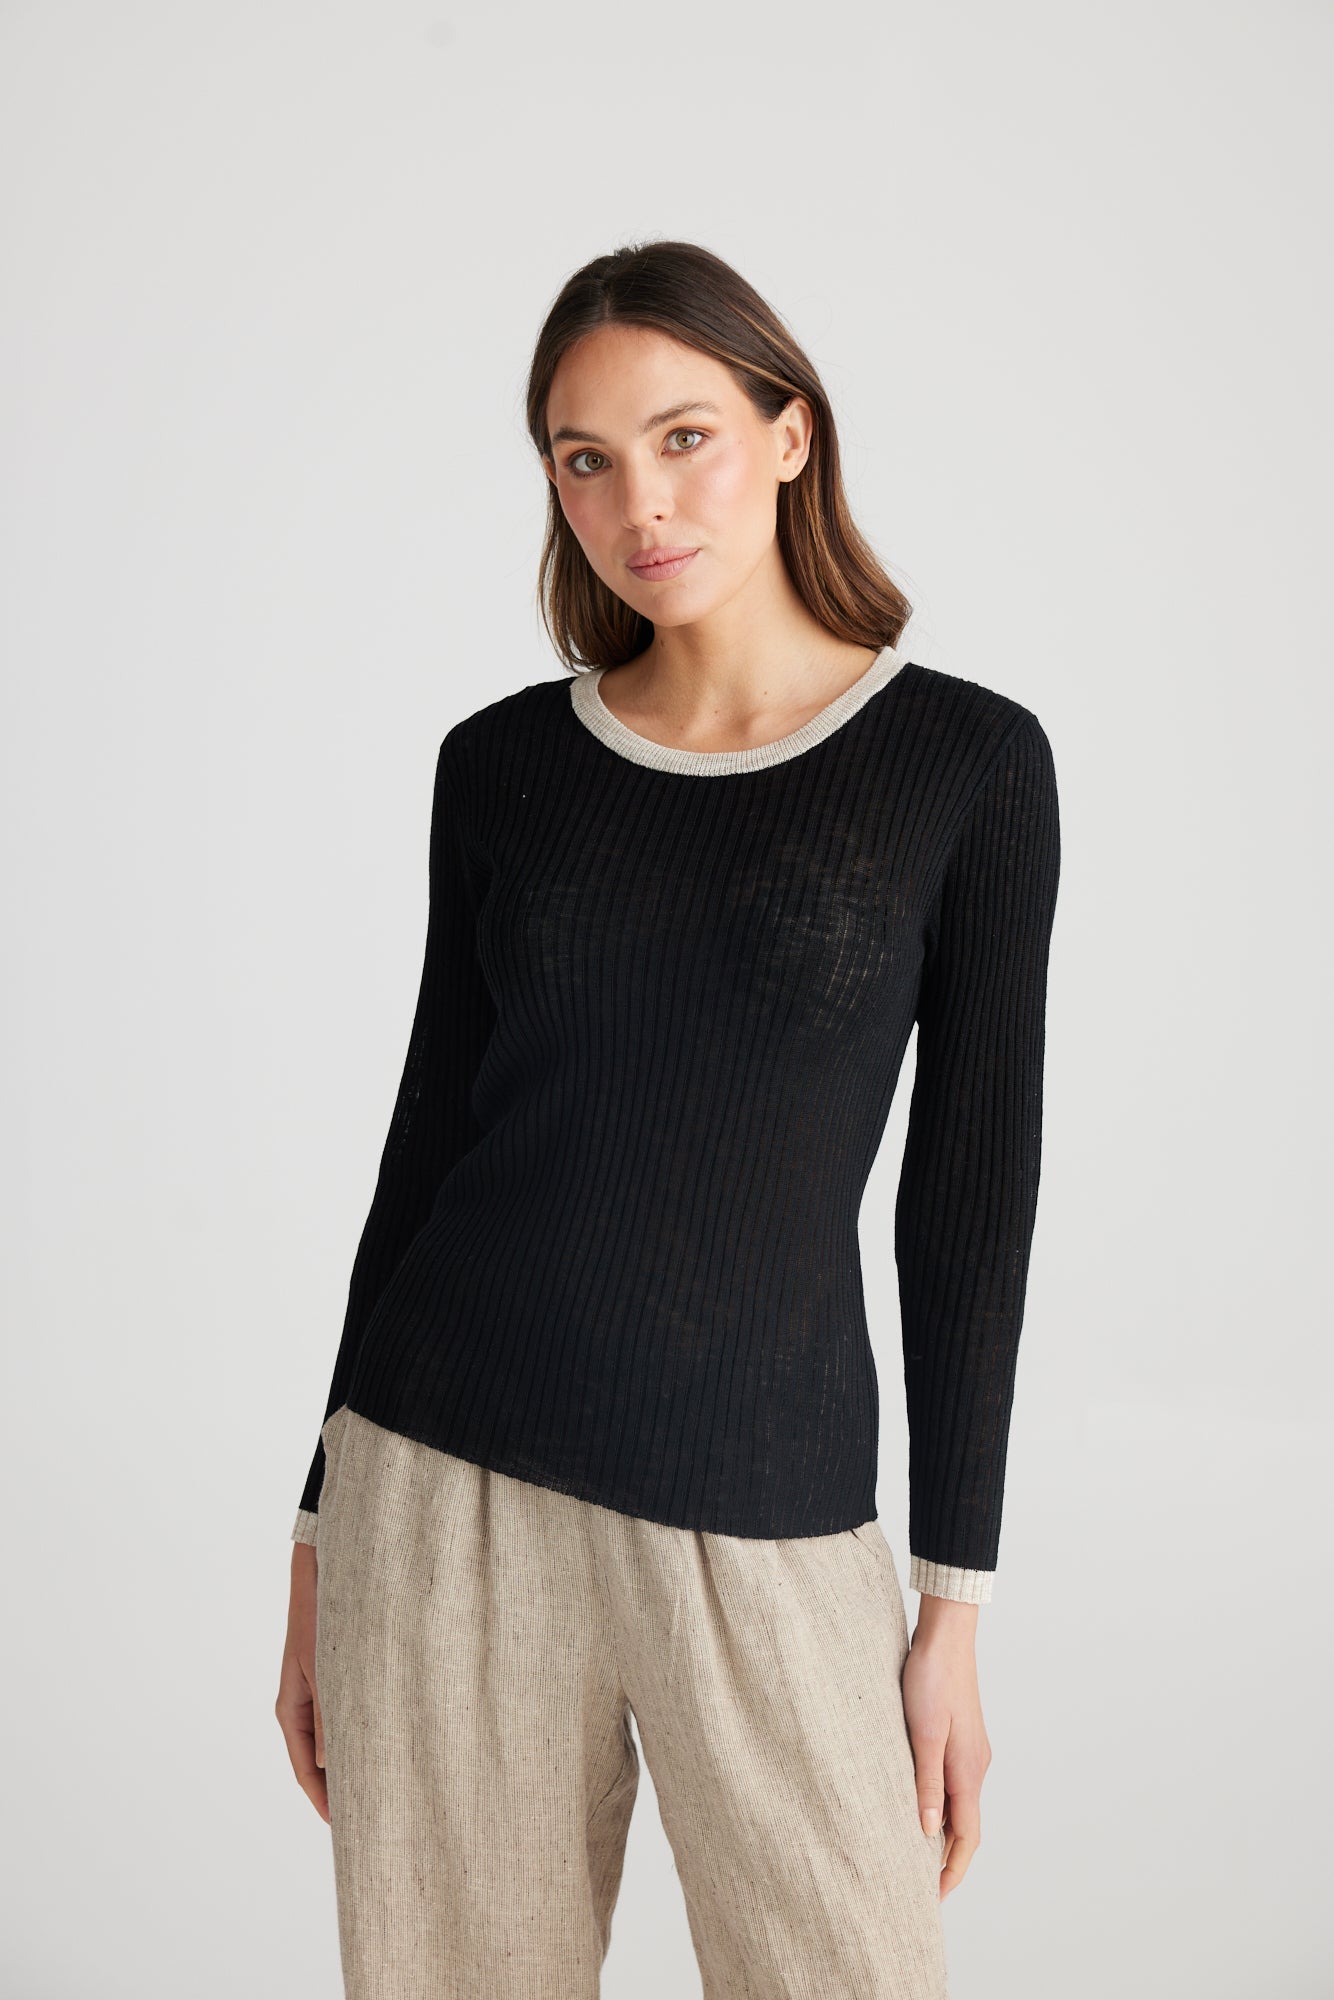 Saturn Long Sleeve Top - Black-Tops-The Shanty Corporation-The Bay Room